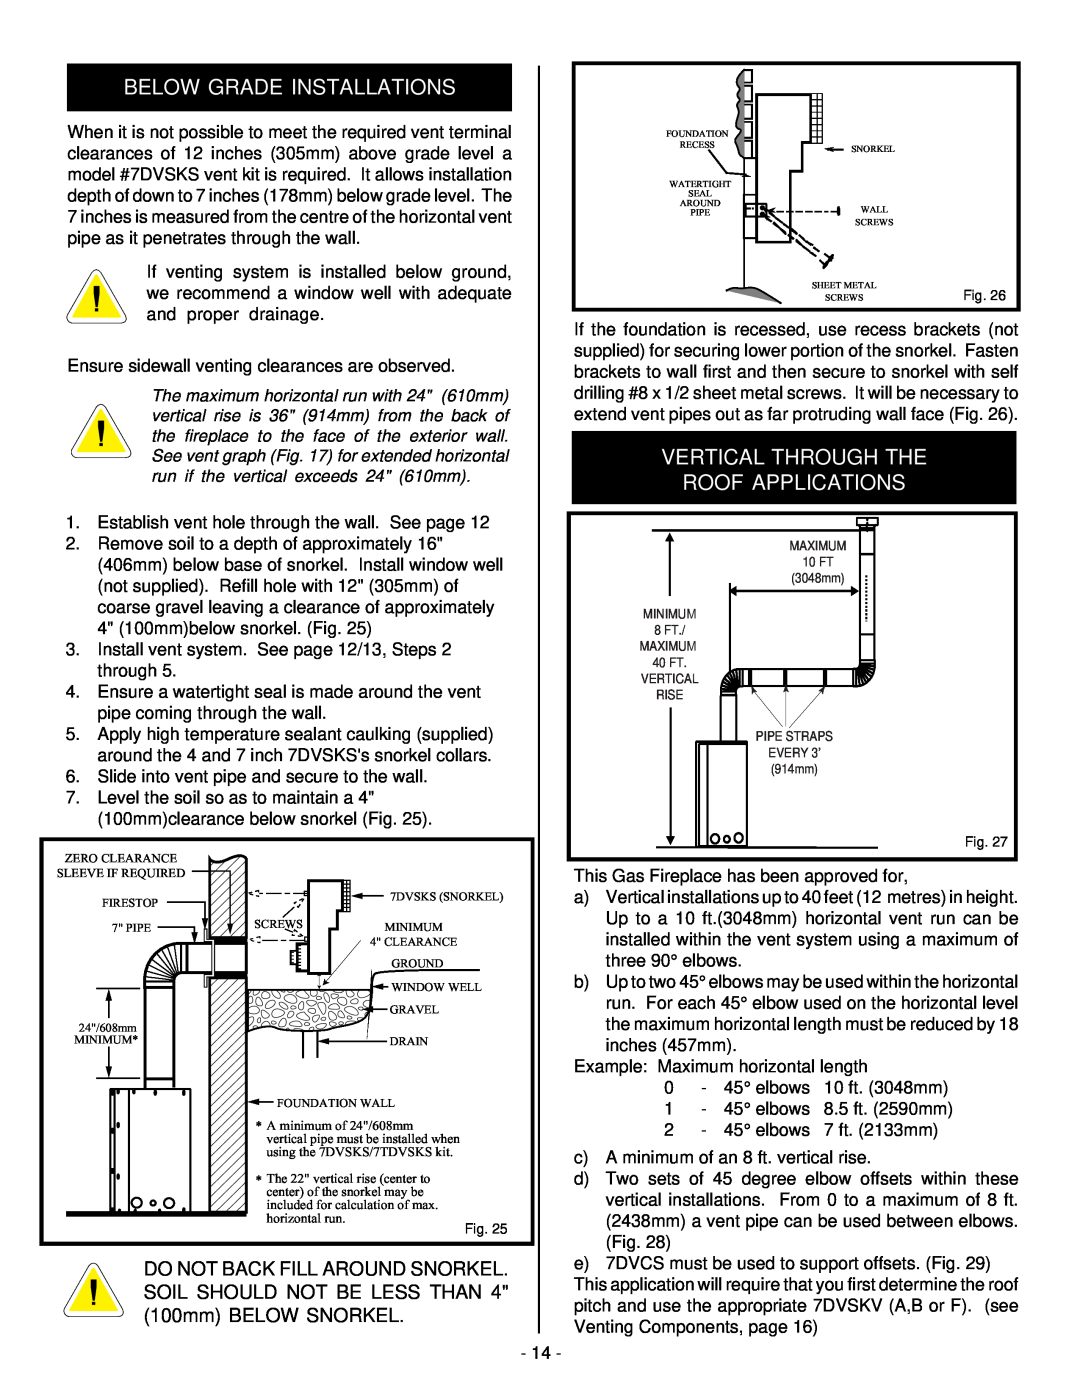 Vermont Casting BHDT36 installation instructions Below Grade Installations, Vertical Through The Roof Applications 